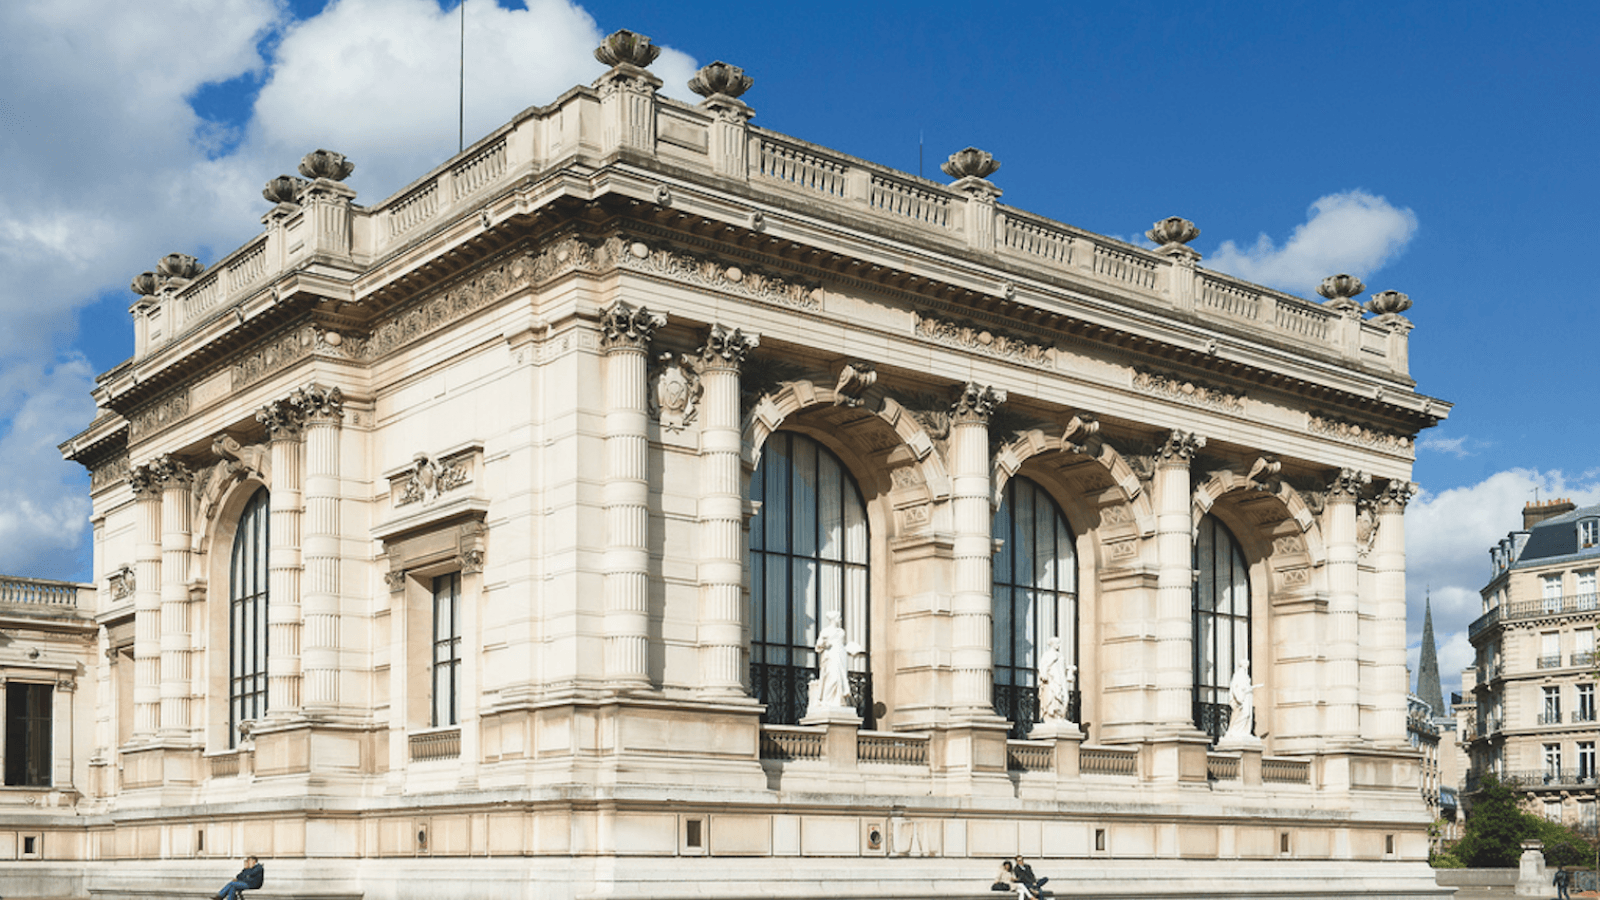 The Palais Galliera reopens with an exhibition featuring Chanel